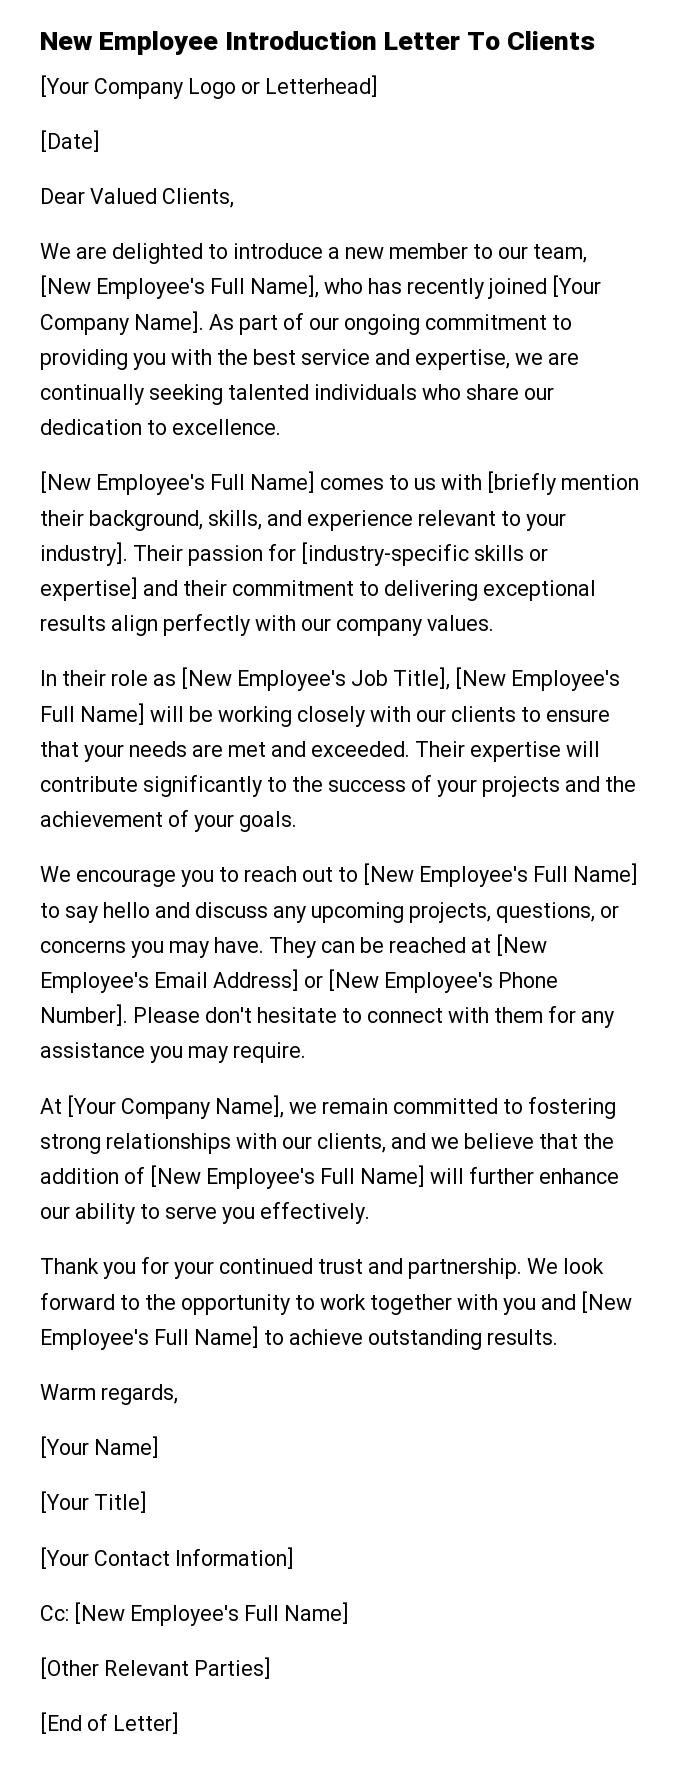 New Employee Introduction Letter To Clients